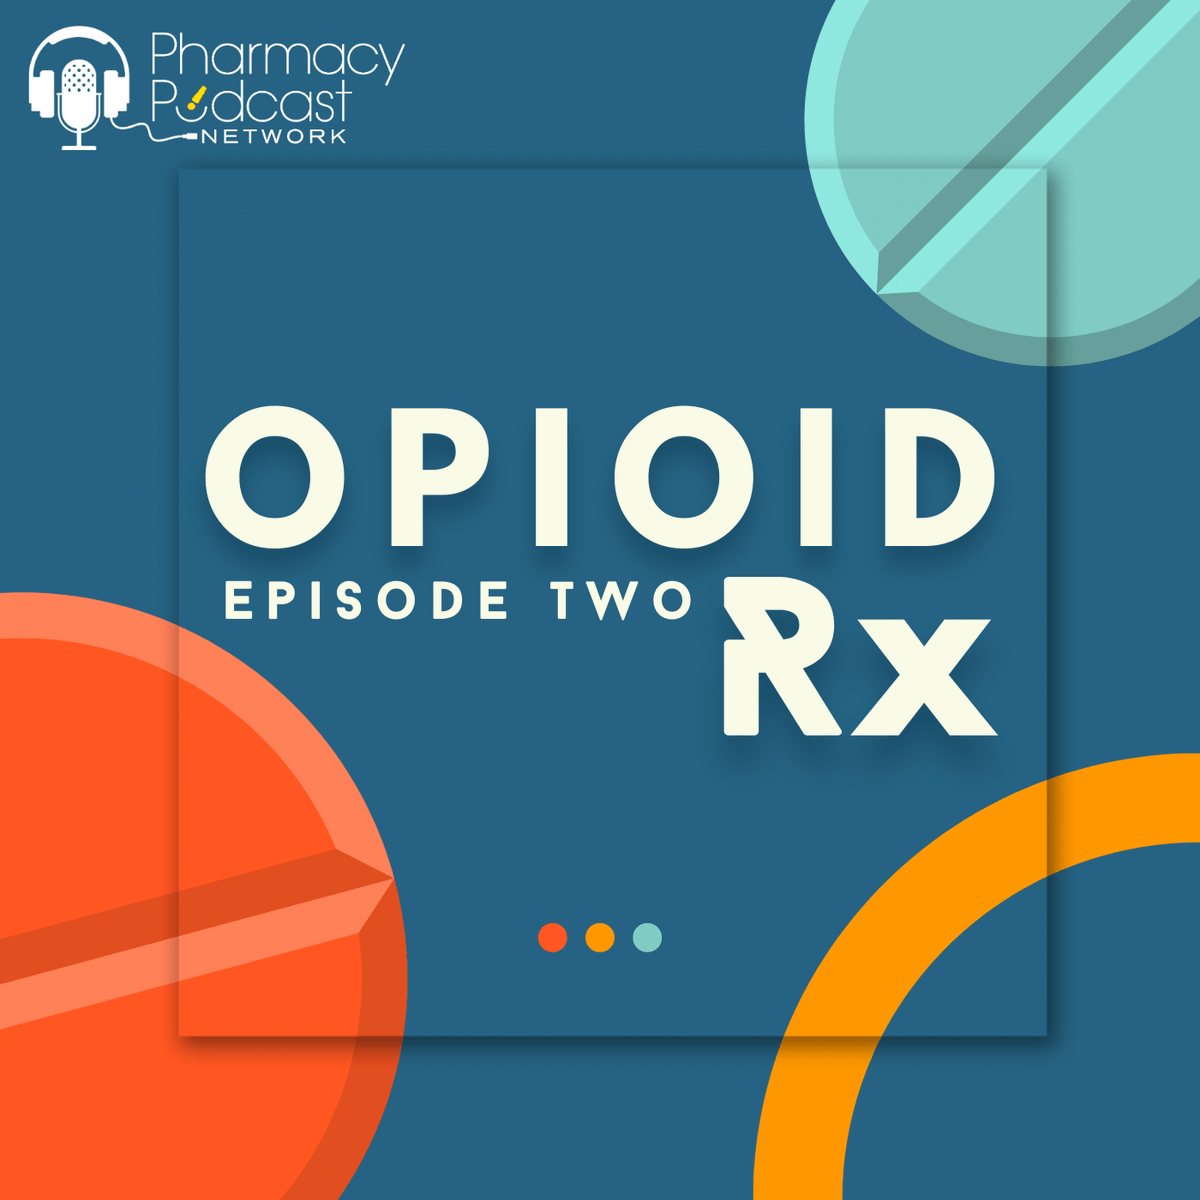 #OpioidRx Part 2: Dr. Bratberg understands the challenges community @pharmacists and pharmacies face regarding opioid safety, overdose, harm reduction, & addiction pharmacotherapy.  Listen to his valuable insights. 

podcasts.apple.com/us/podcast/par… 

@RIpharmacists @URI_Pharmacy